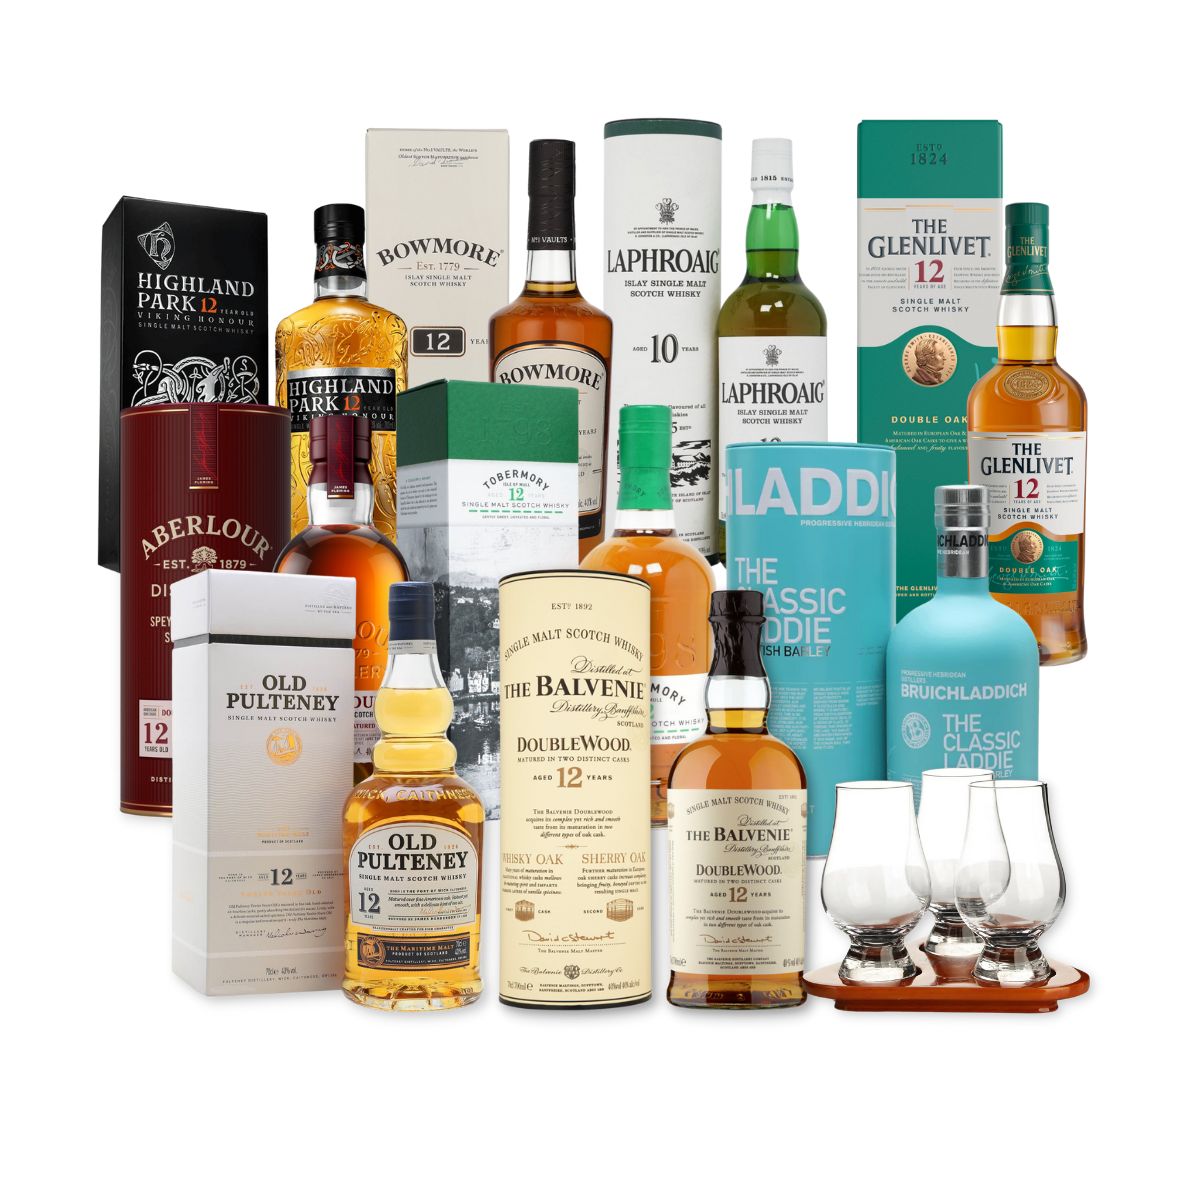 https://crate-drop.com/wp-content/uploads/2022/04/glancairn-glass-flight-tray-with-whisky-options.jpg